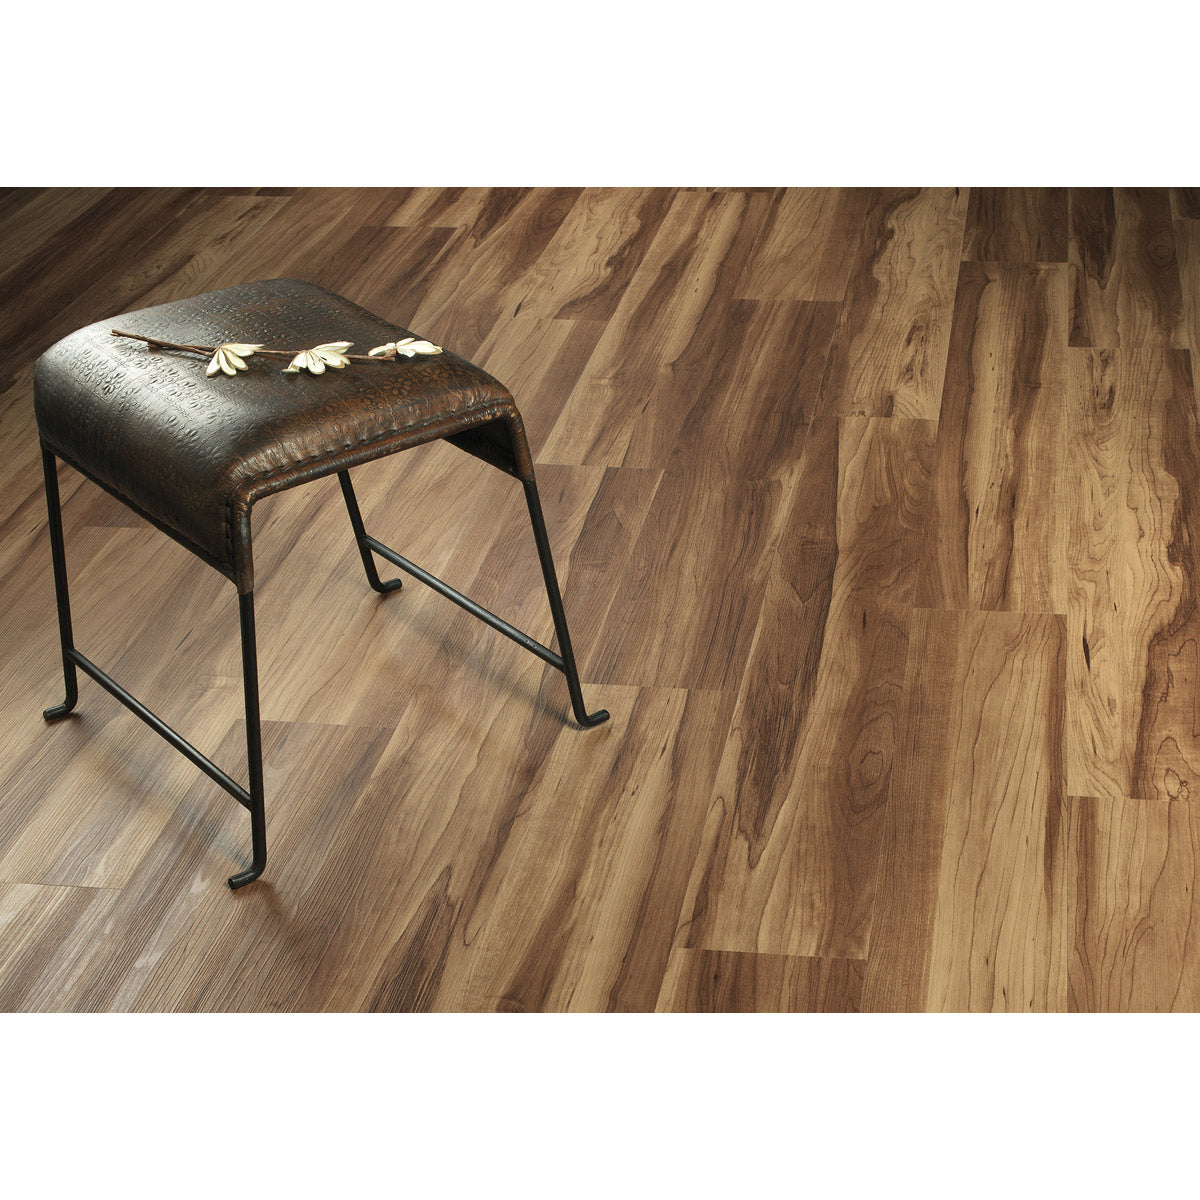 Engineered Floors - Ozark 2 Collection - 7 in. x 48 in. - Sugar Maple Installed